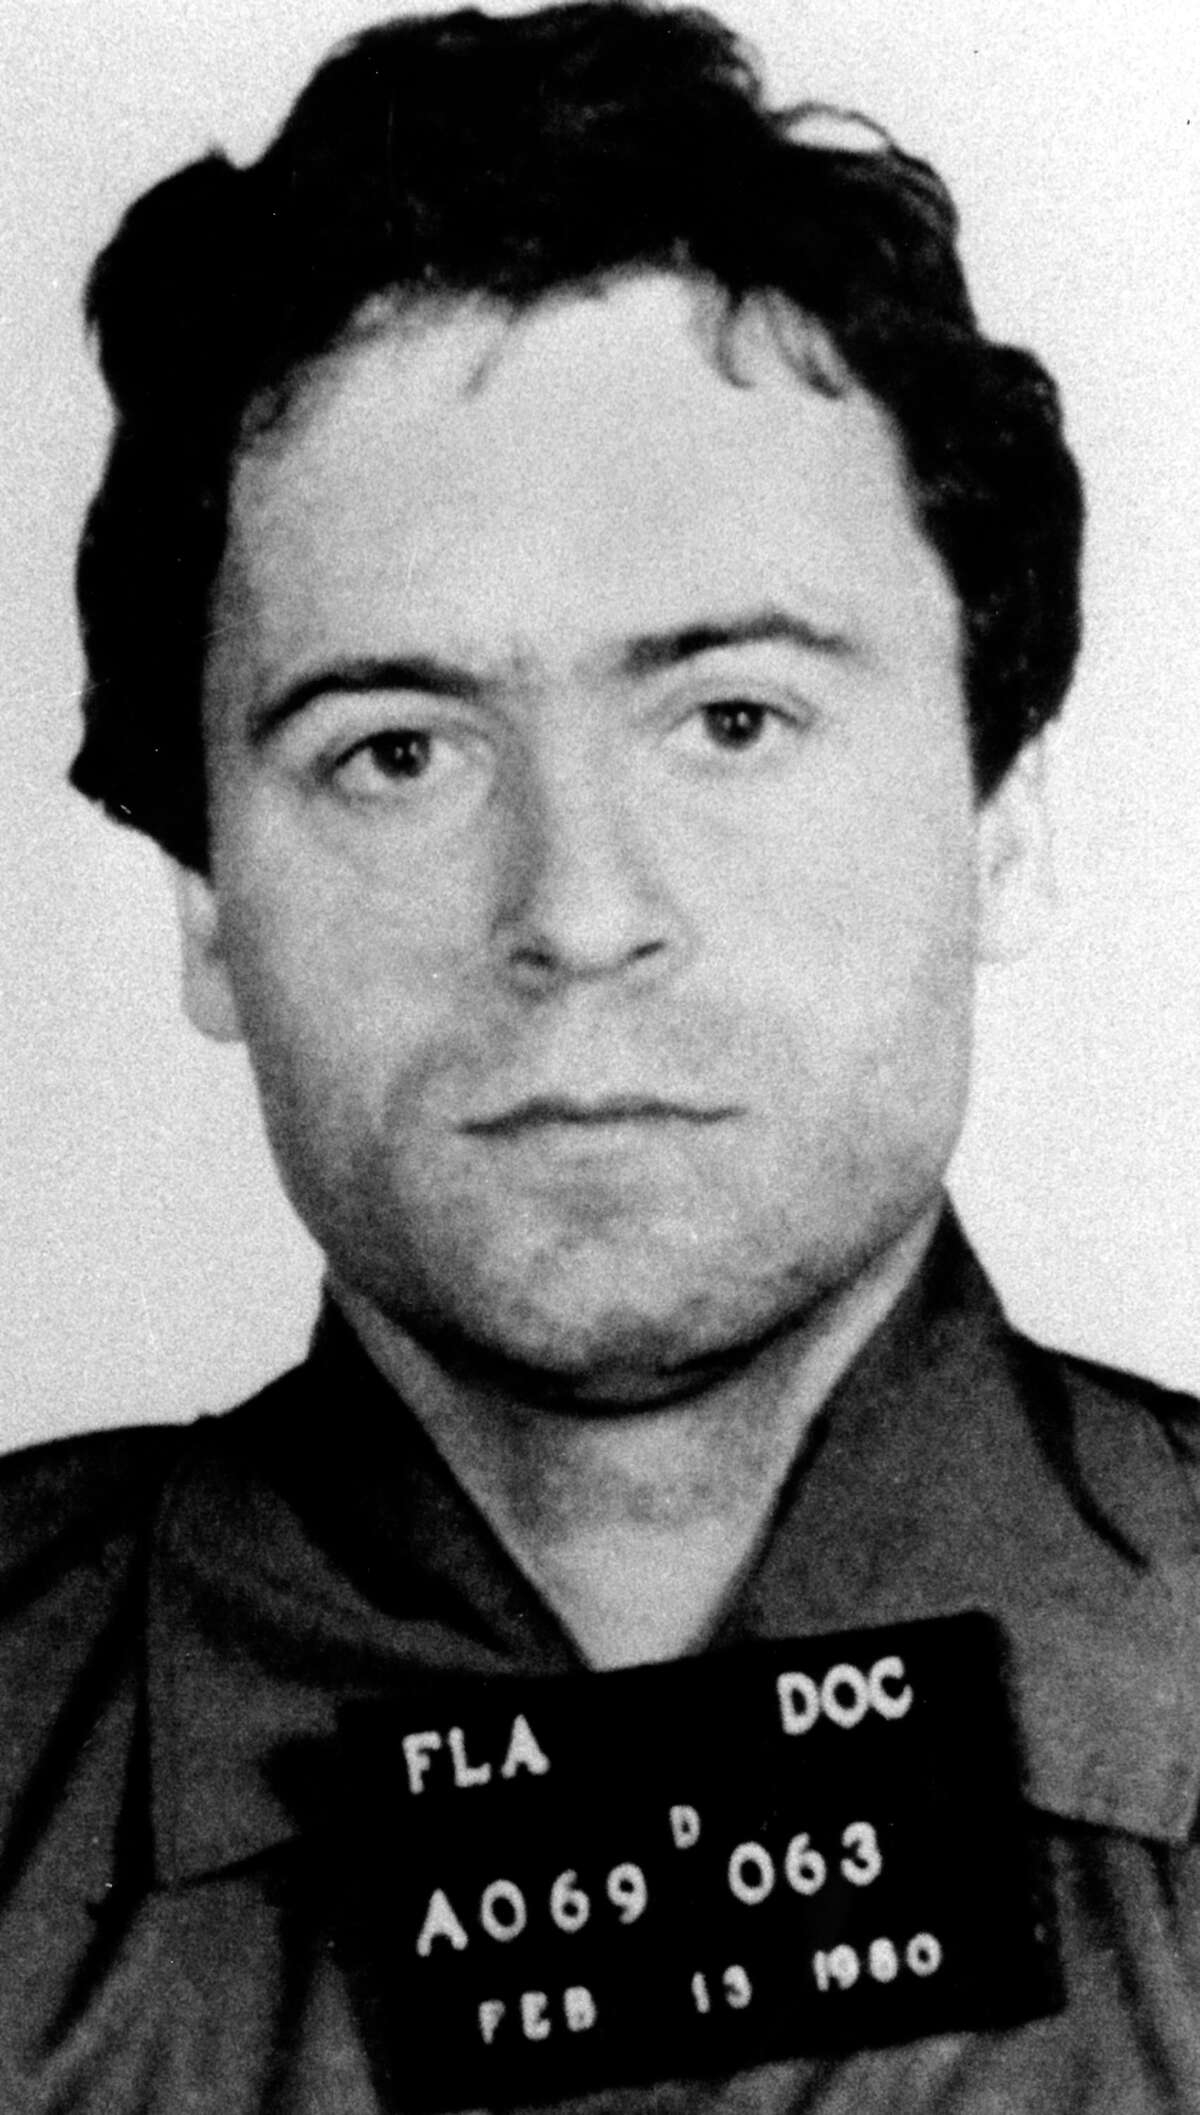 Netflix's Ted Bundy documentary is almost everything that's wrong with ...